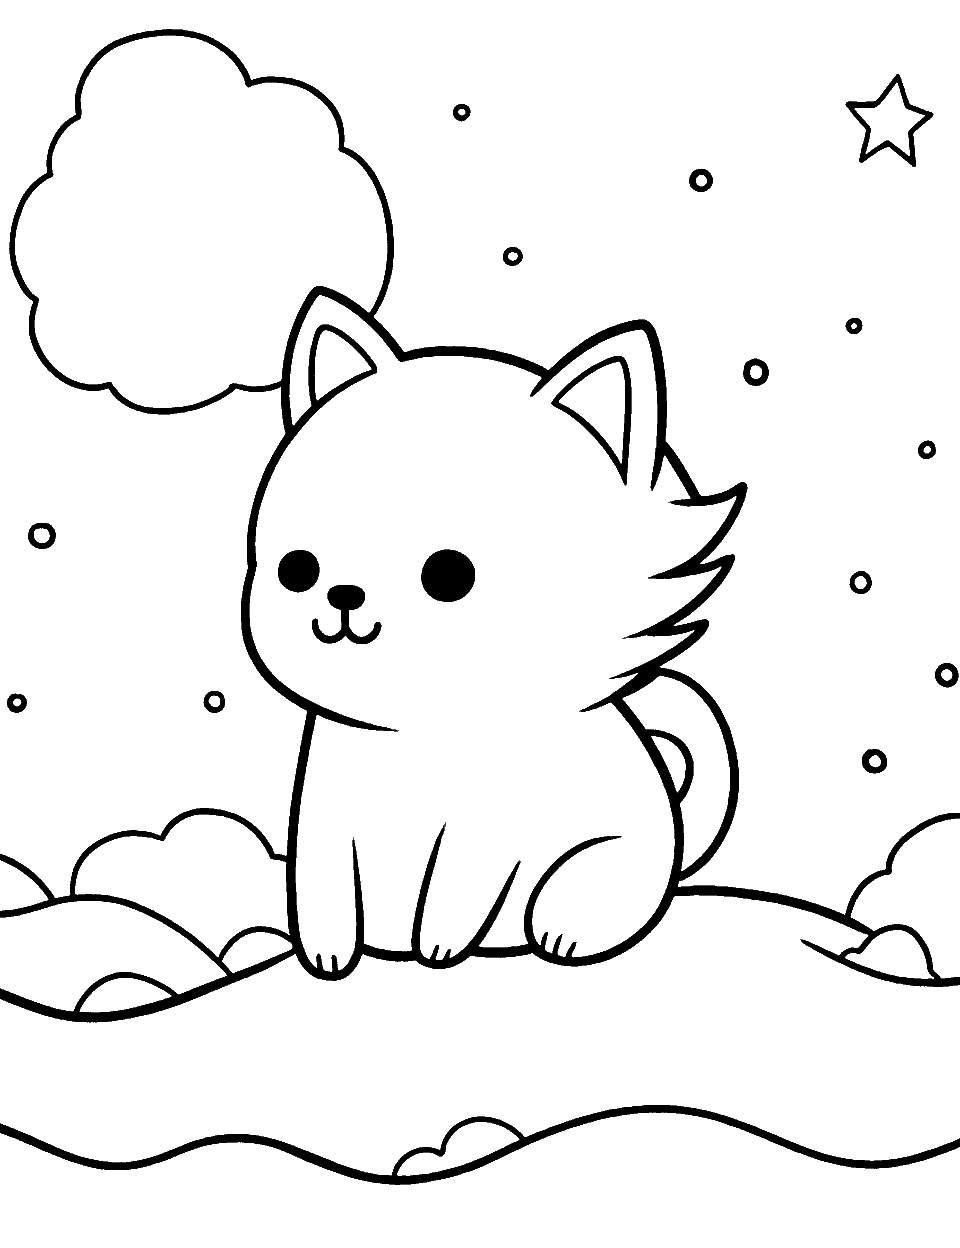 Wolf's Wish Upon a Star Kawaii Coloring Page - A Kawaii wolf sitting on a hilltop.